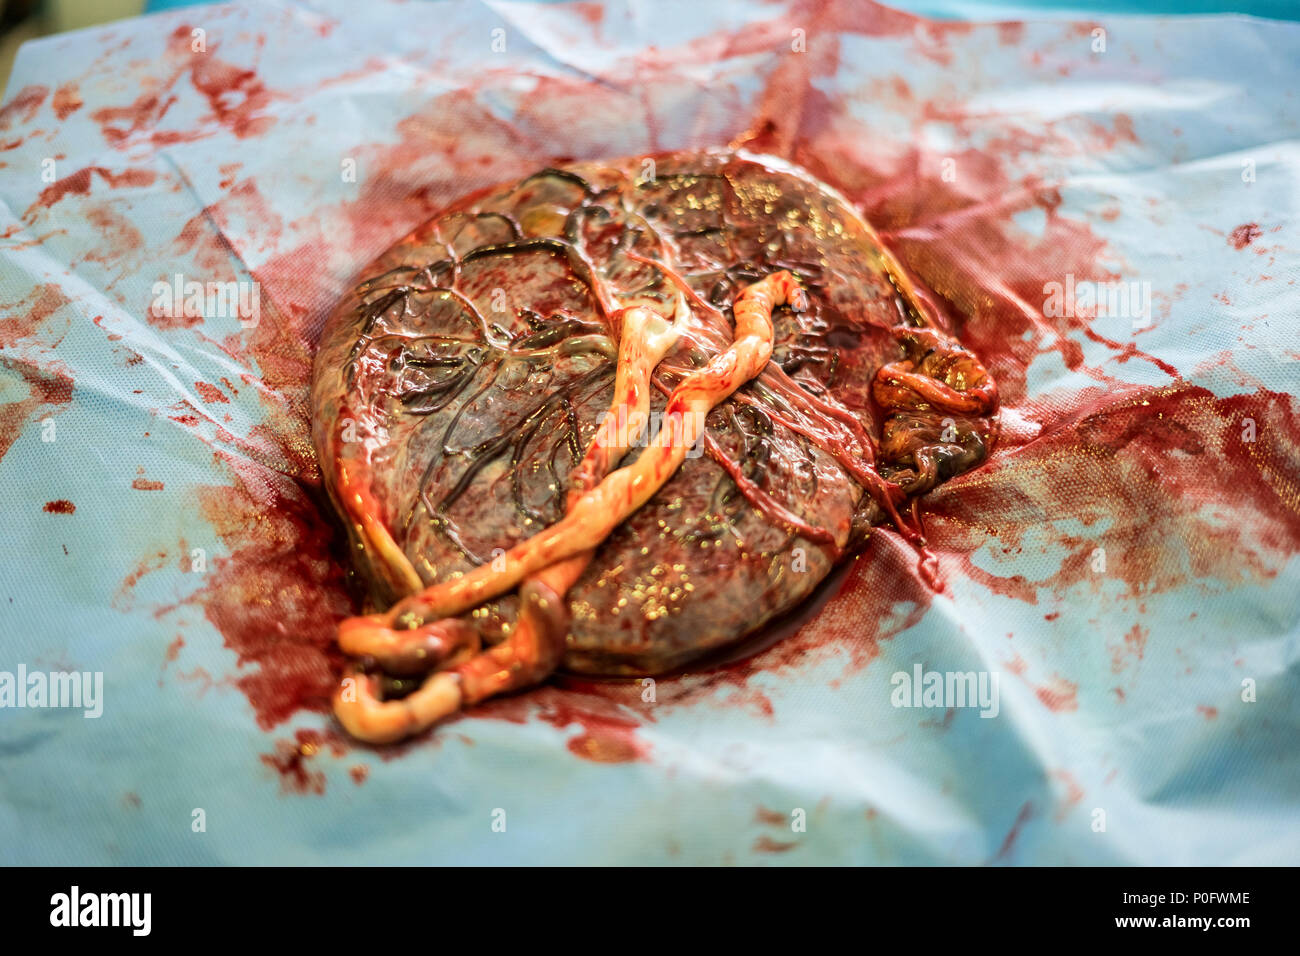 Placenta outside uterus just after childbirth in the hospital Stock Photo